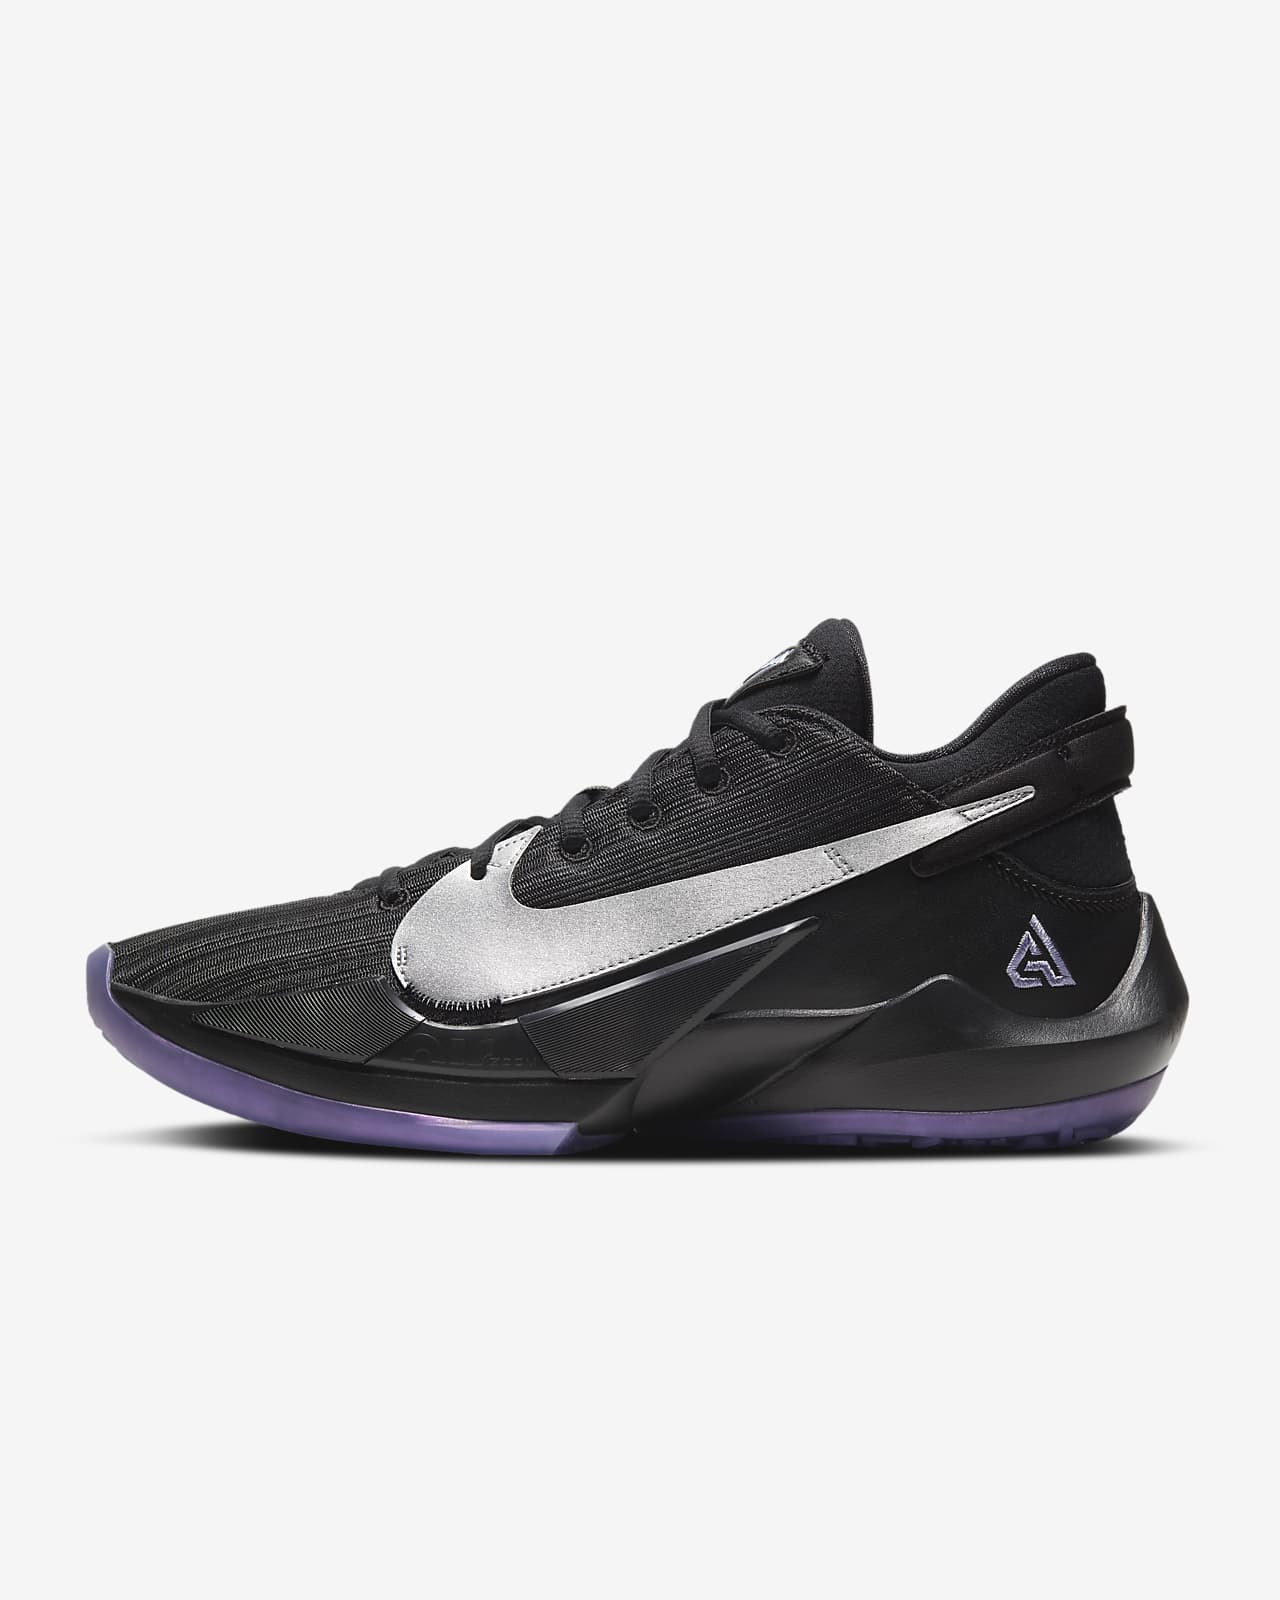 nike zoom low basketball shoes